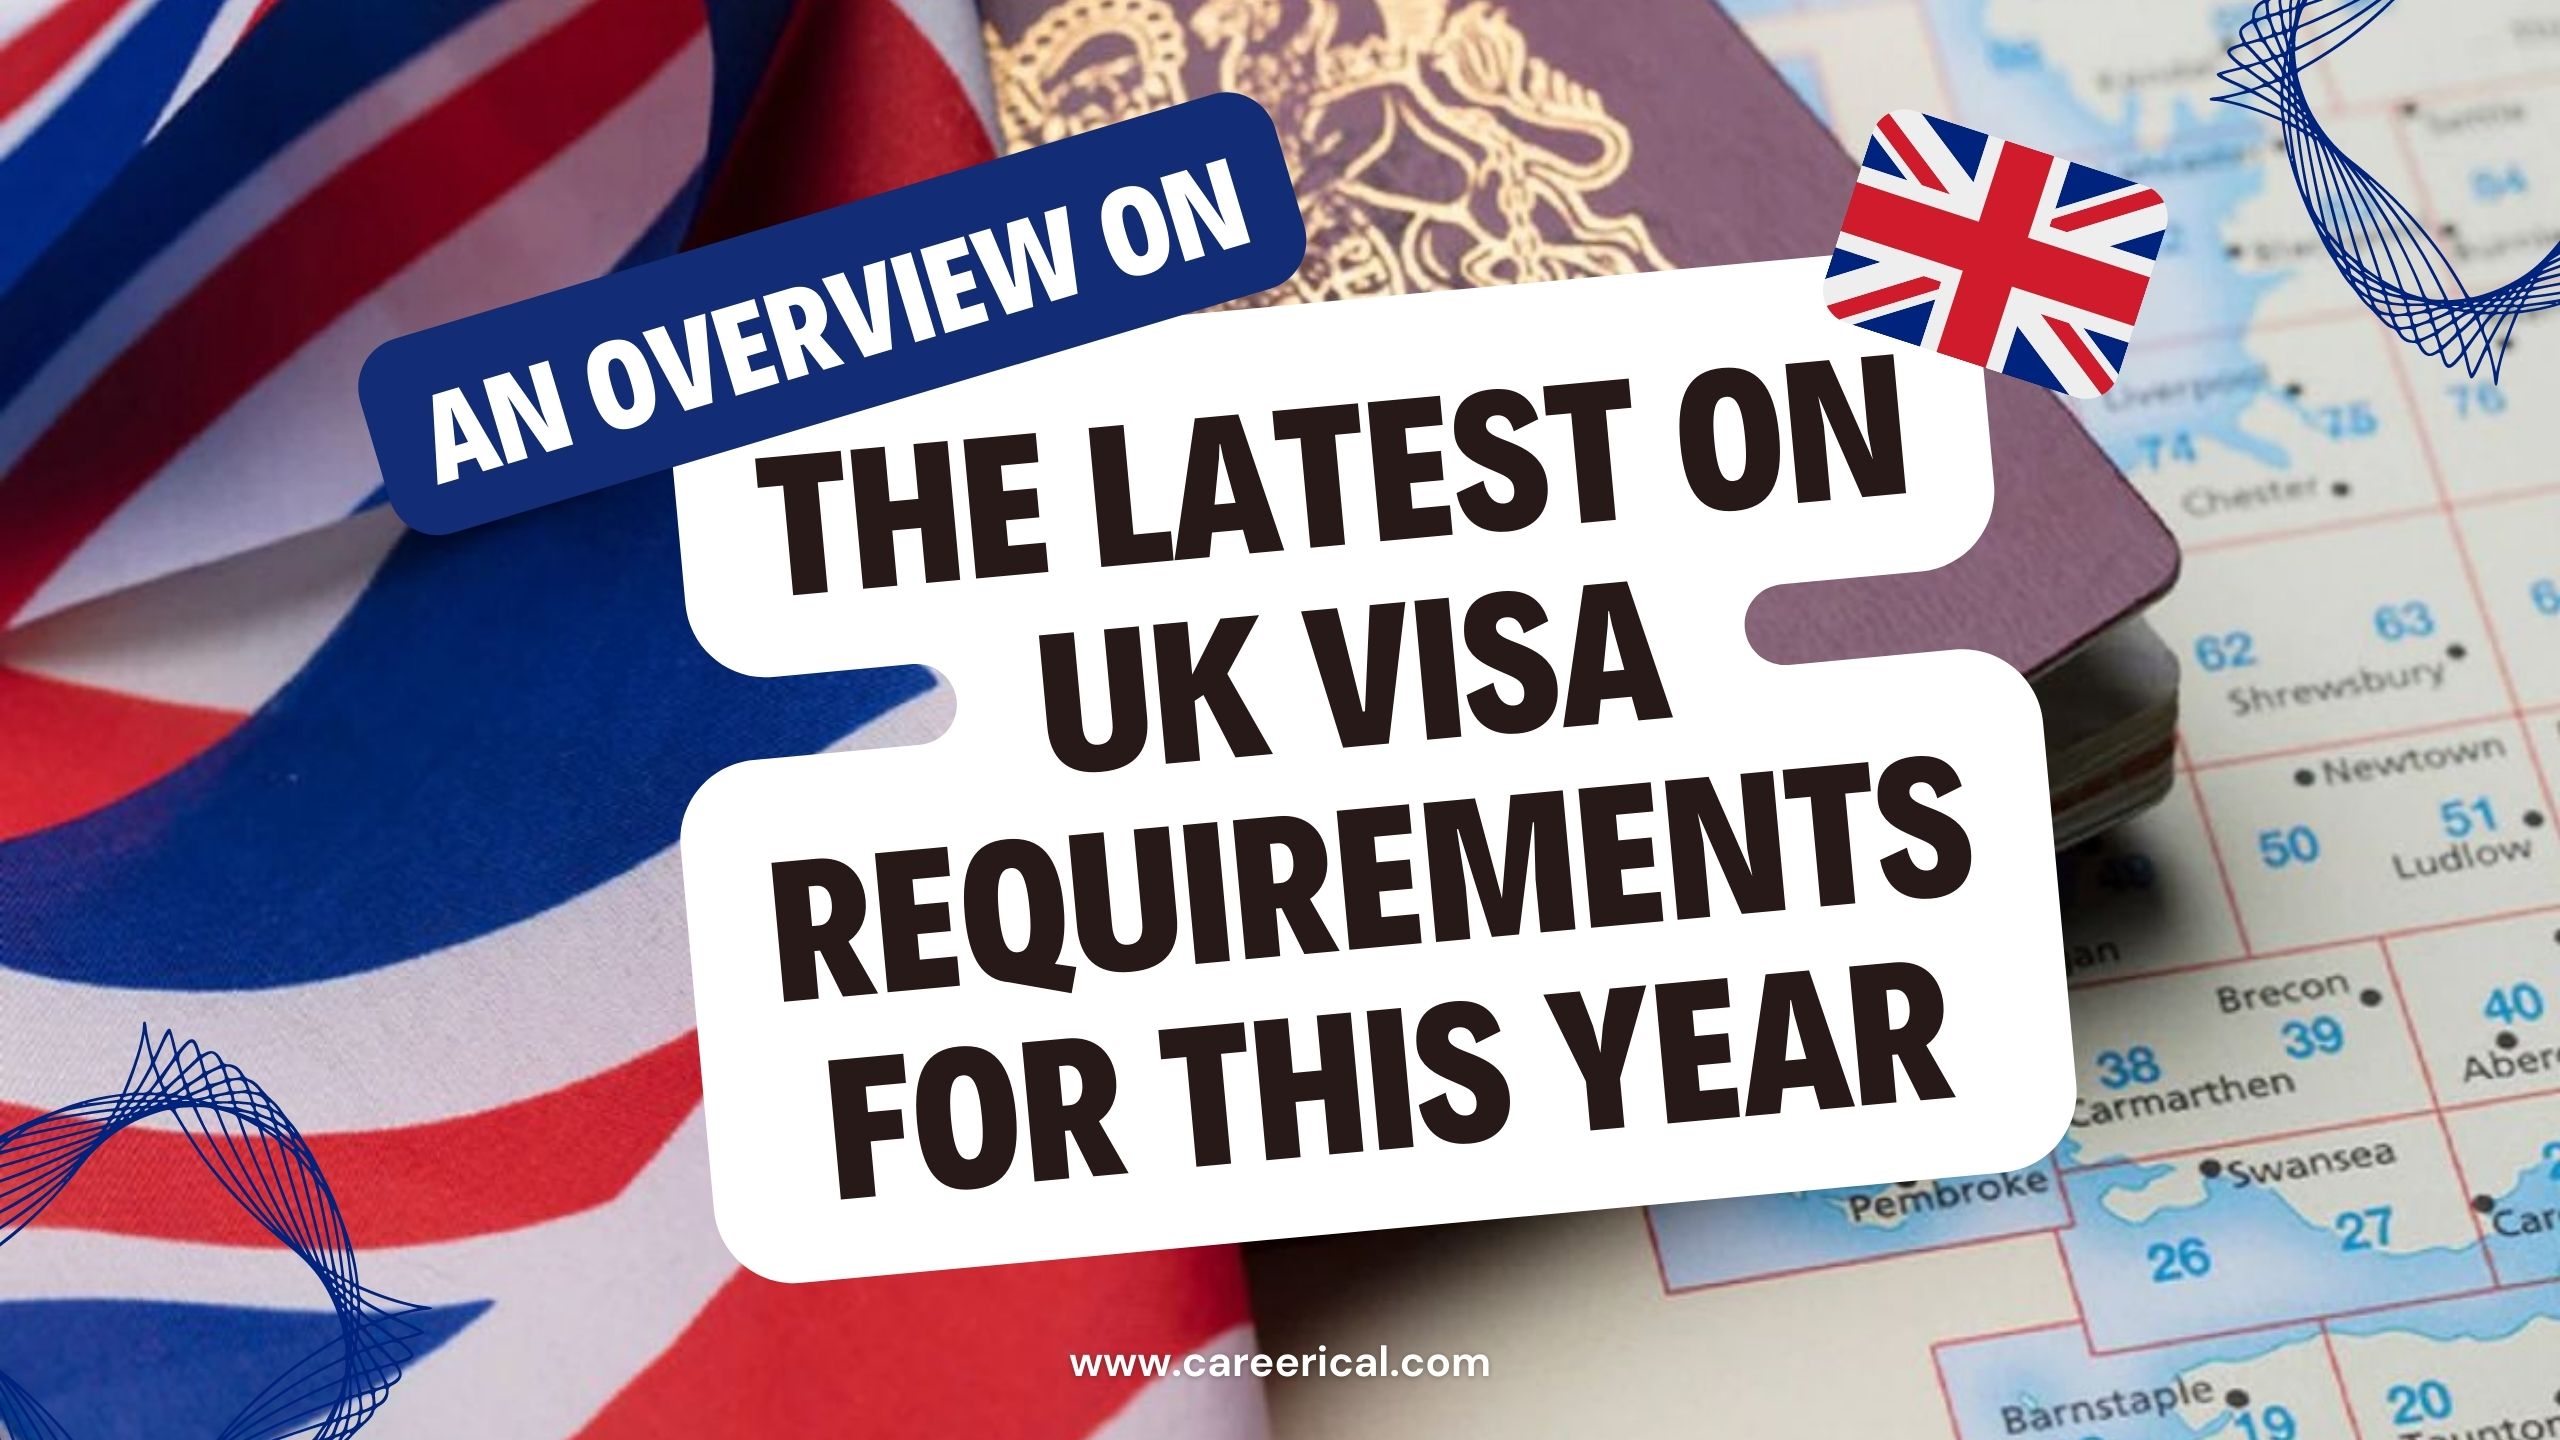 The Latest on UK Visa Requirements for this year